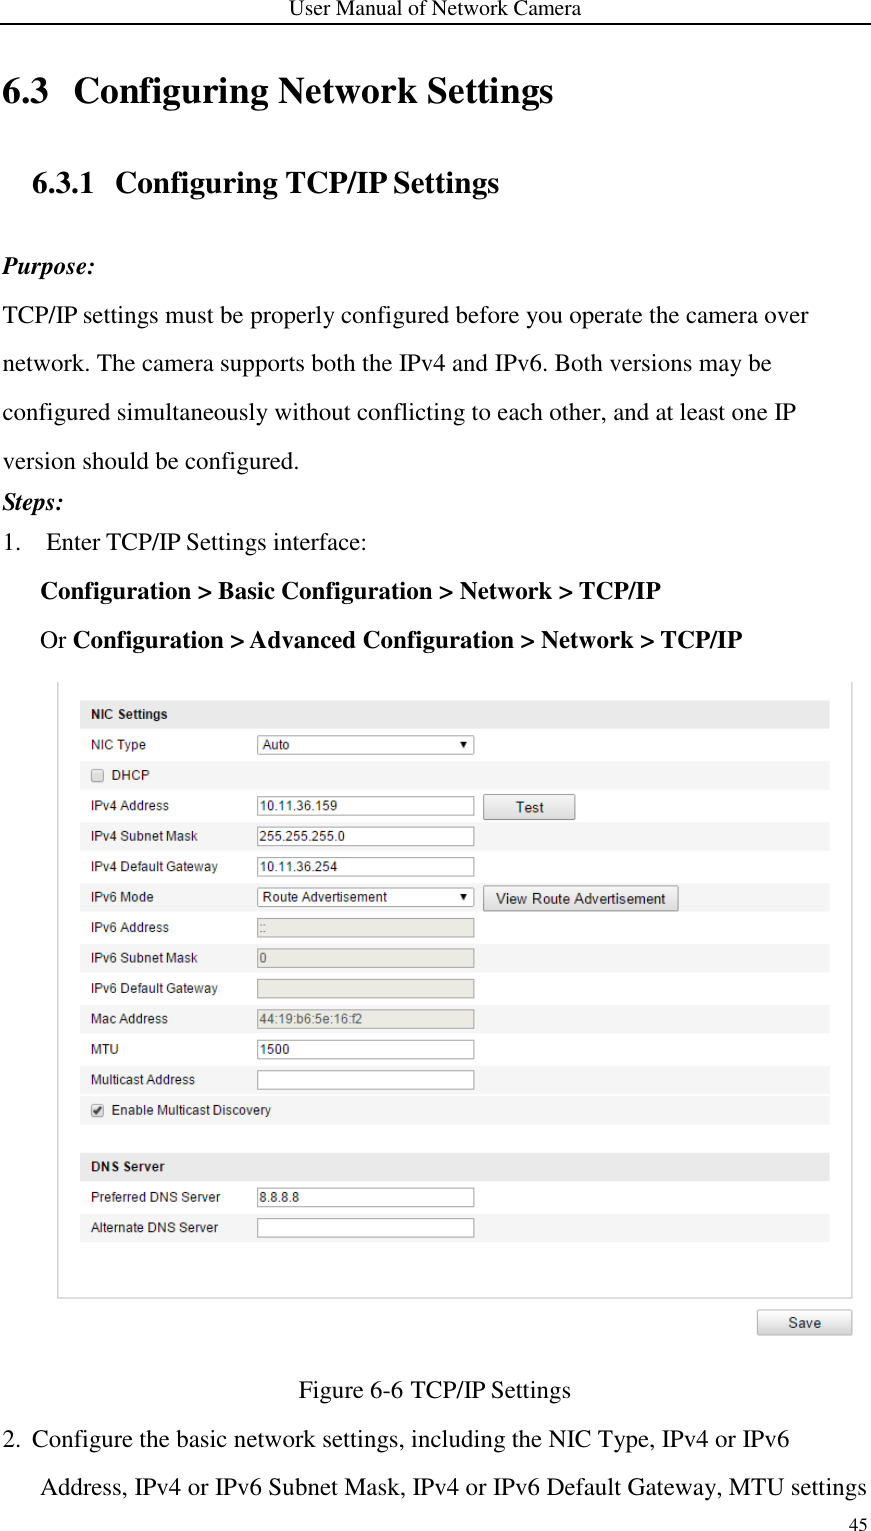 User Manual of Network Camera 45  6.3 Configuring Network Settings 6.3.1 Configuring TCP/IP Settings Purpose: TCP/IP settings must be properly configured before you operate the camera over network. The camera supports both the IPv4 and IPv6. Both versions may be configured simultaneously without conflicting to each other, and at least one IP version should be configured.   Steps: 1. Enter TCP/IP Settings interface: Configuration &gt; Basic Configuration &gt; Network &gt; TCP/IP   Or Configuration &gt; Advanced Configuration &gt; Network &gt; TCP/IP  Figure 6-6 TCP/IP Settings 2. Configure the basic network settings, including the NIC Type, IPv4 or IPv6 Address, IPv4 or IPv6 Subnet Mask, IPv4 or IPv6 Default Gateway, MTU settings 